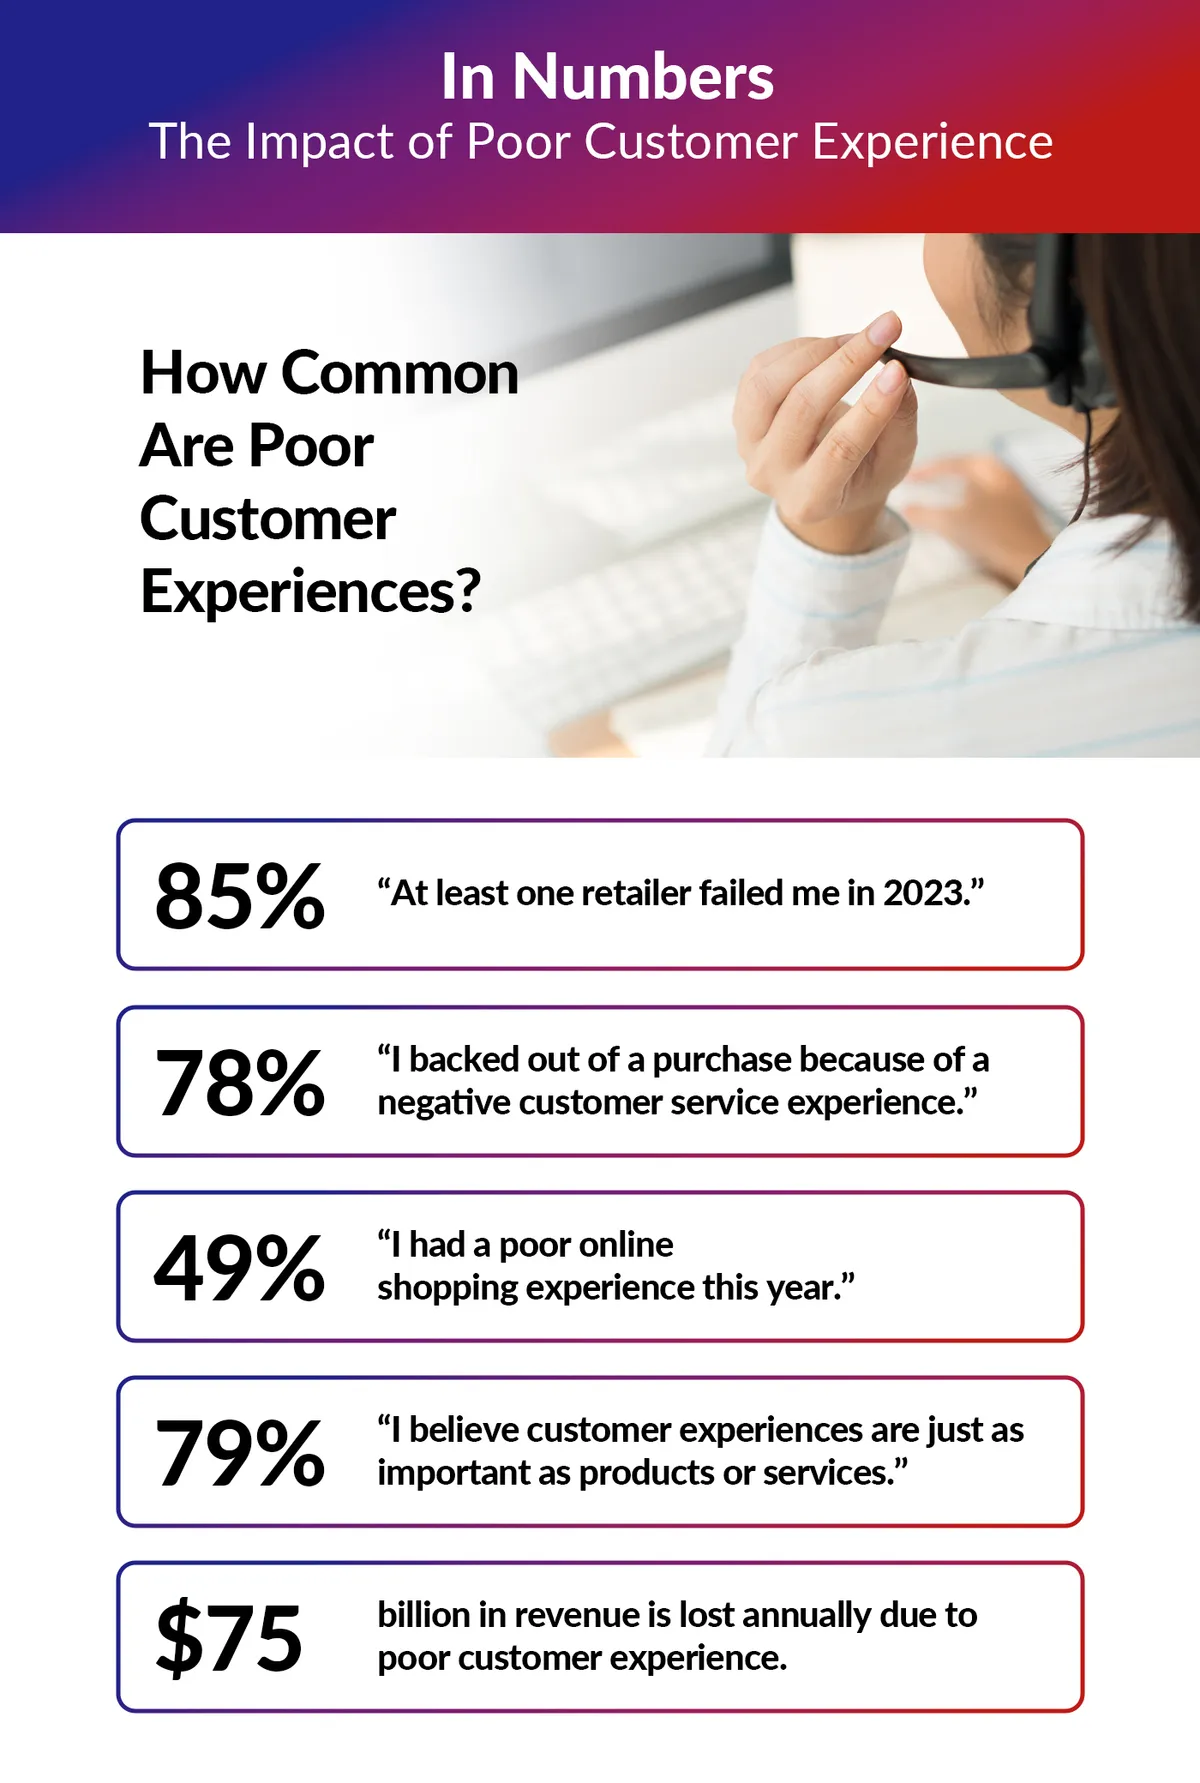 An infographic showing how common poor customer experiences are.